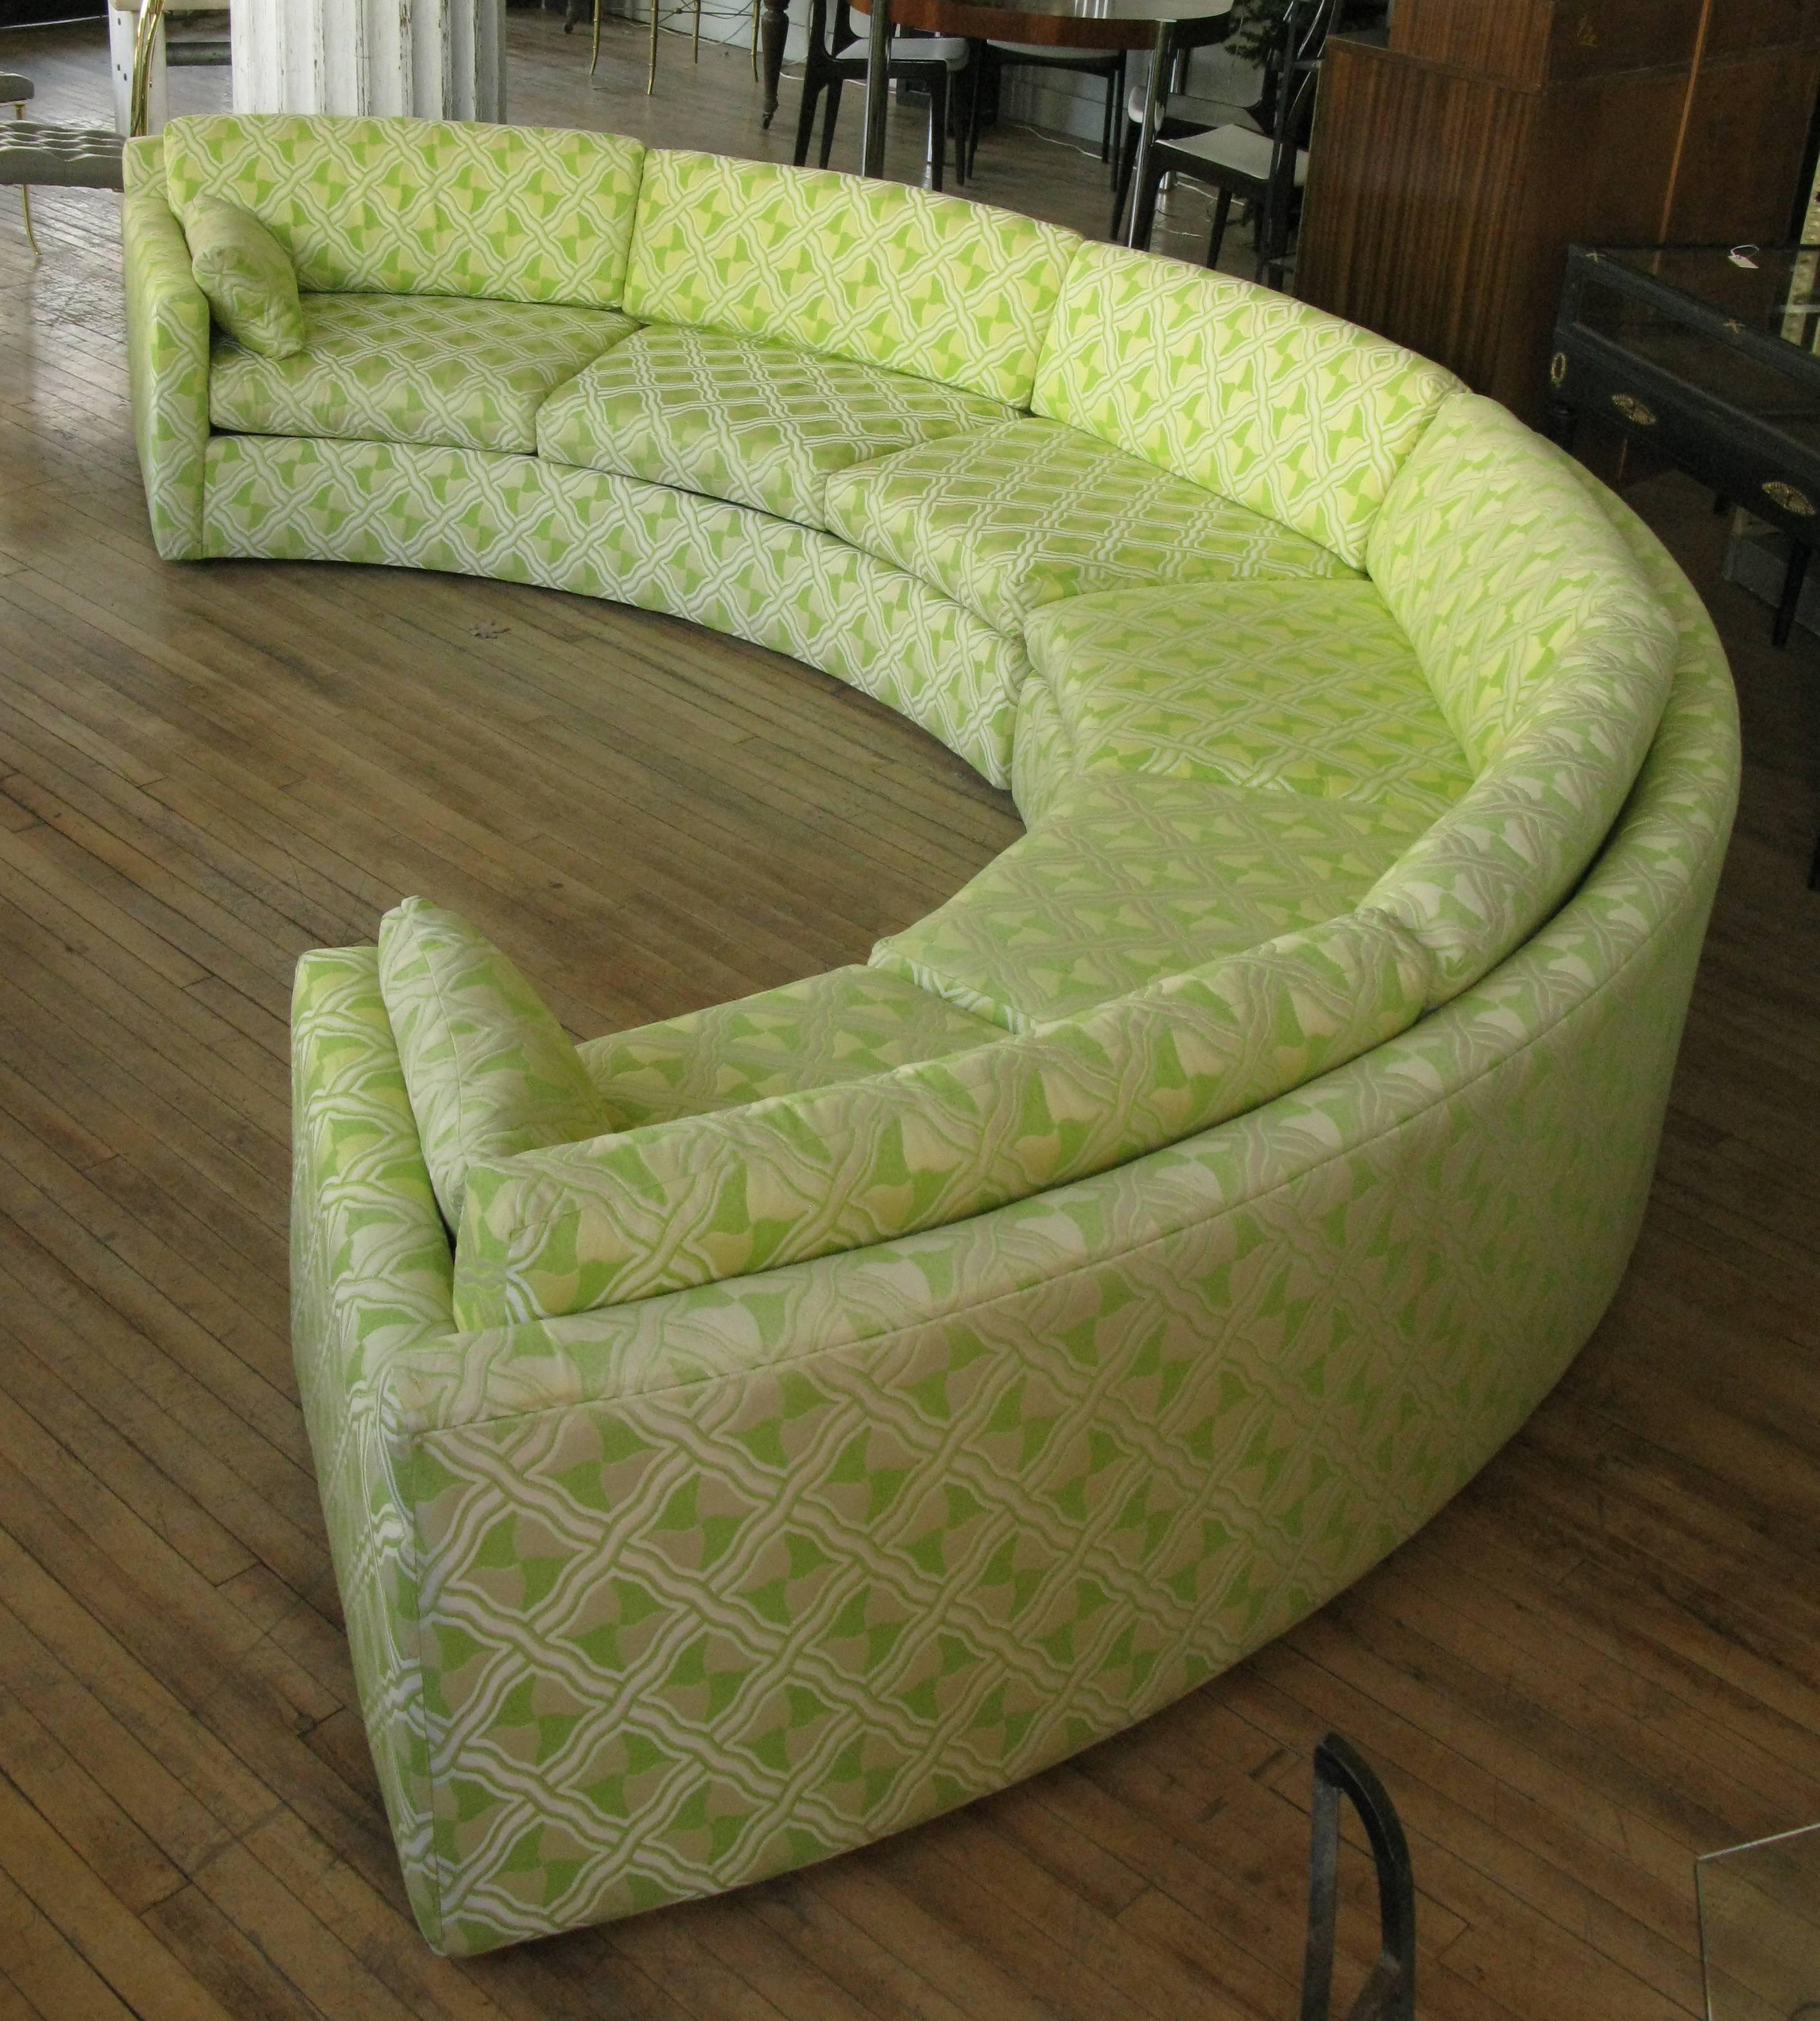 An amazing large curved semi-circular sectional sofa designed by Milo Baughman for Thayer Coggin, circa 1970. Fantastic shape and proportions make this a very comfortable sofa. The two curved sections can be placed together for a full semicircle, or